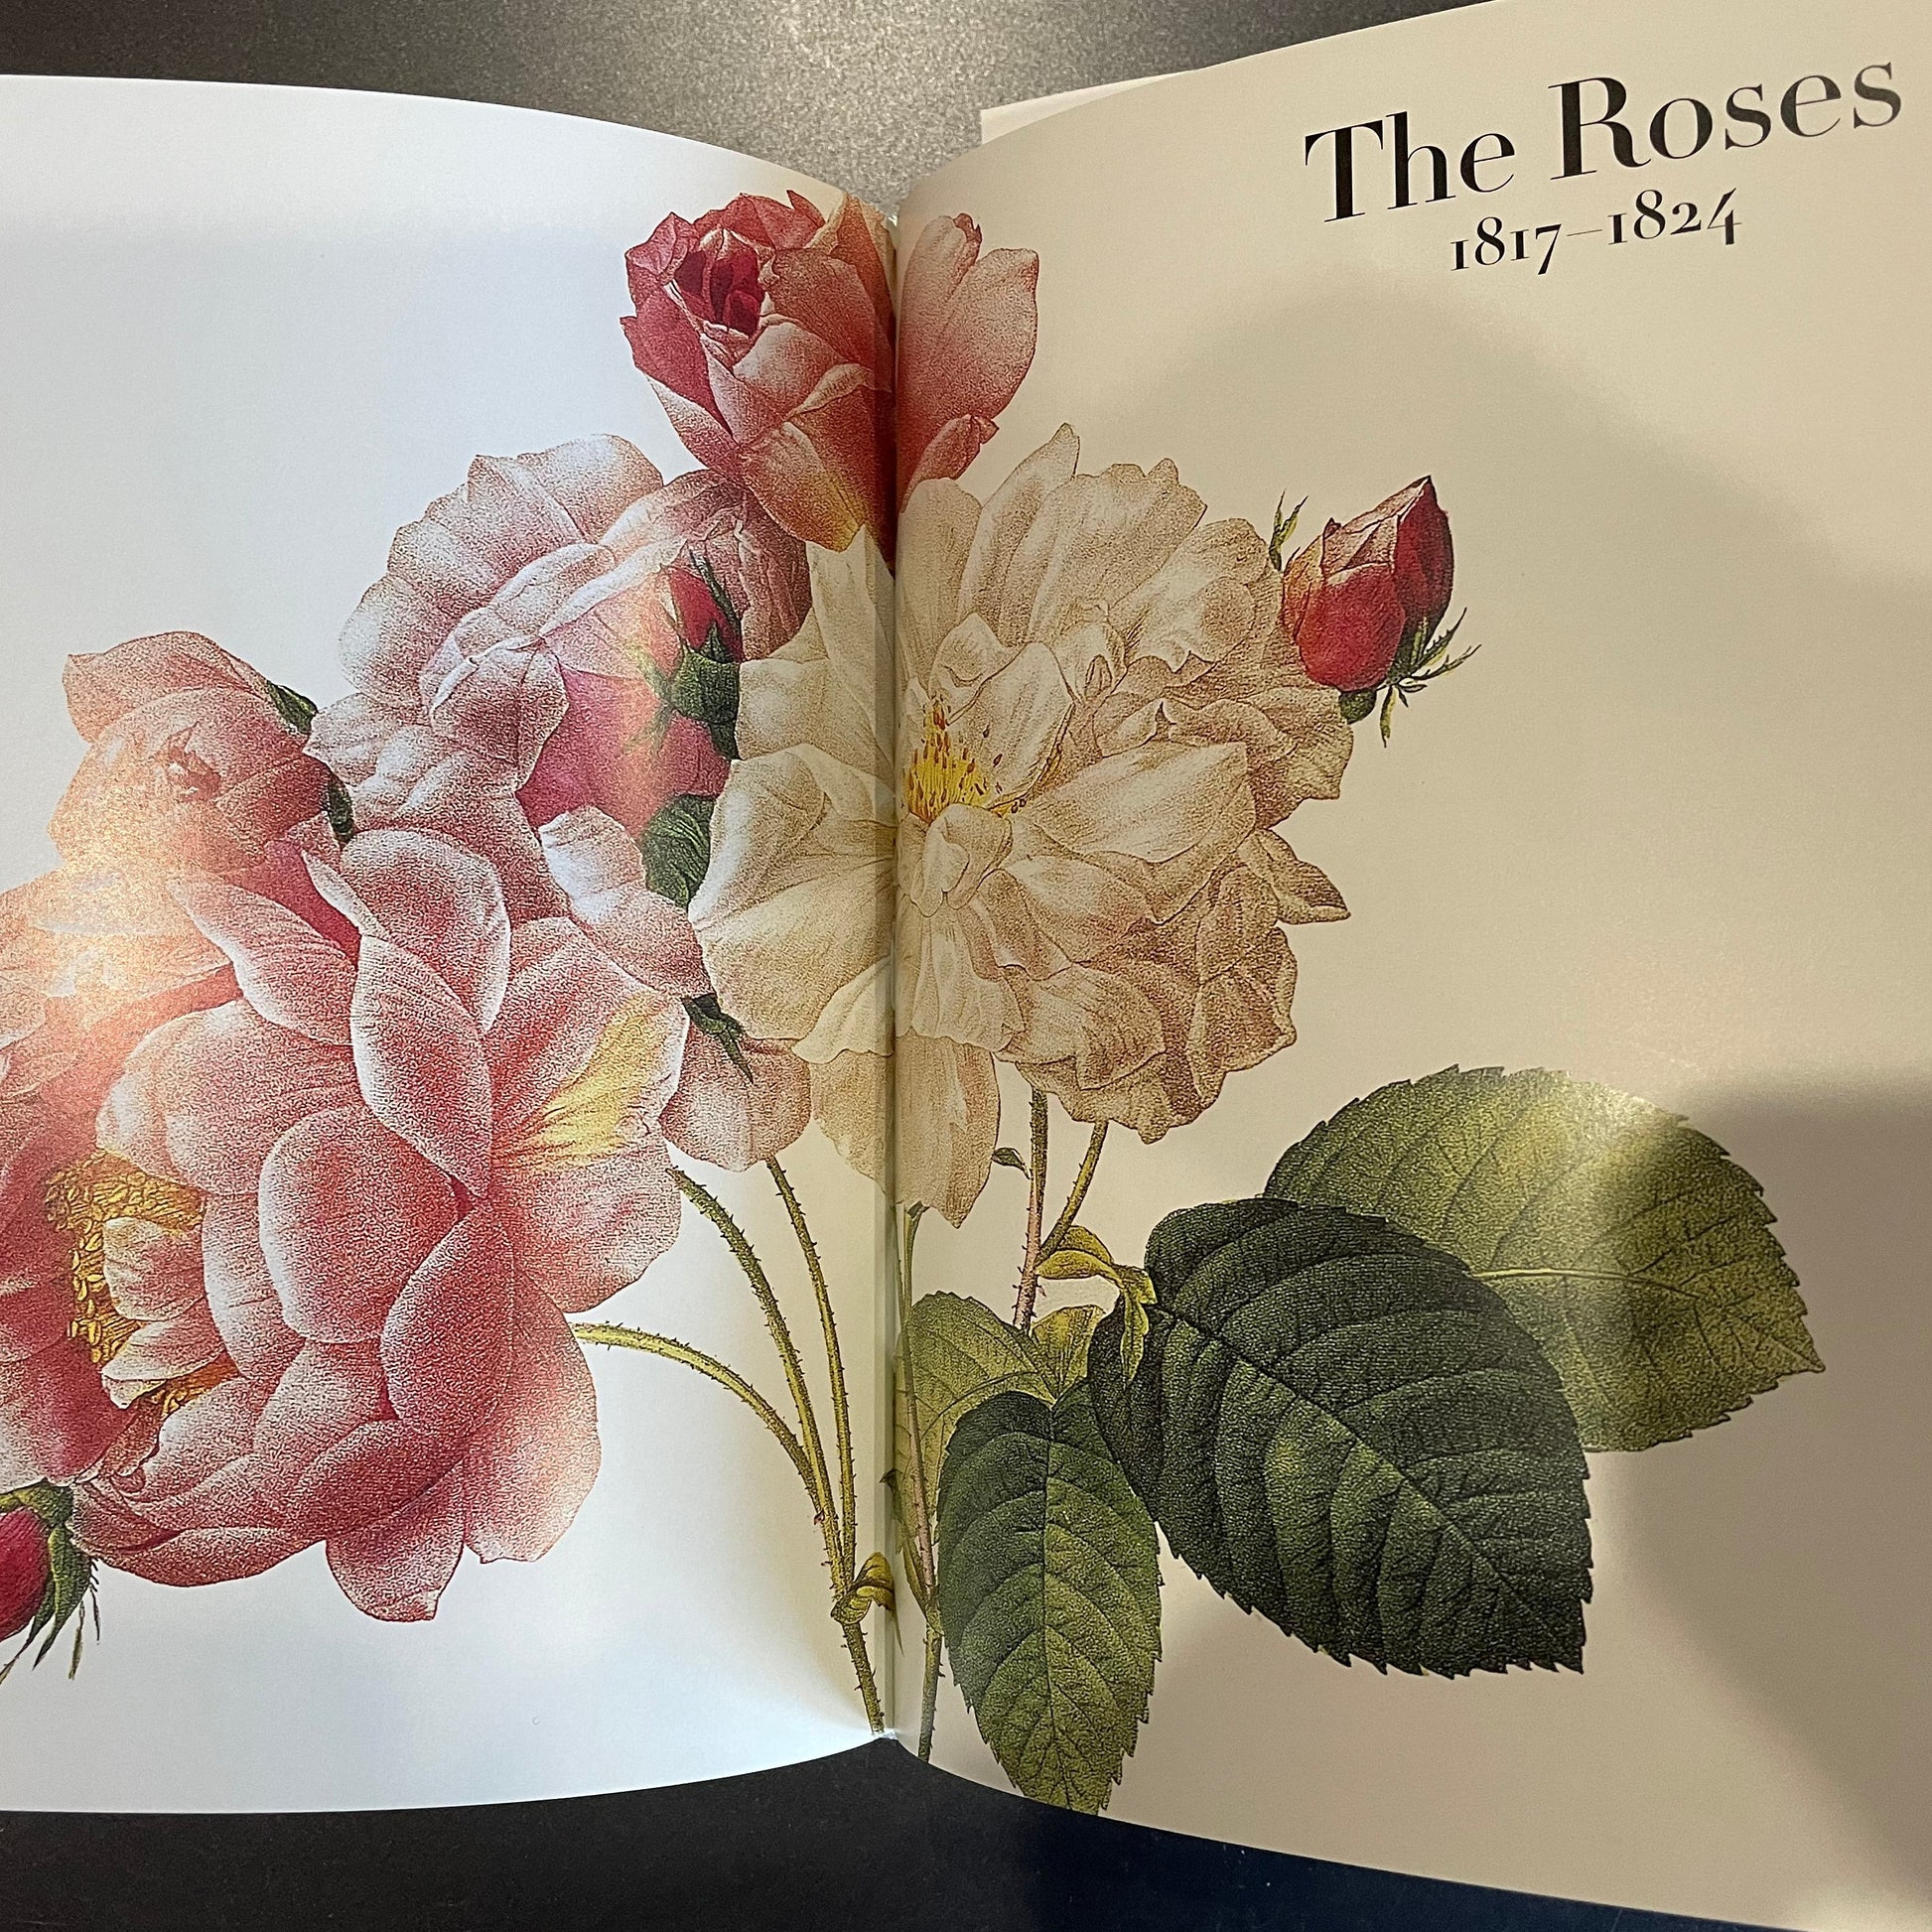 A chapter of the book called The Roses 1817-1827